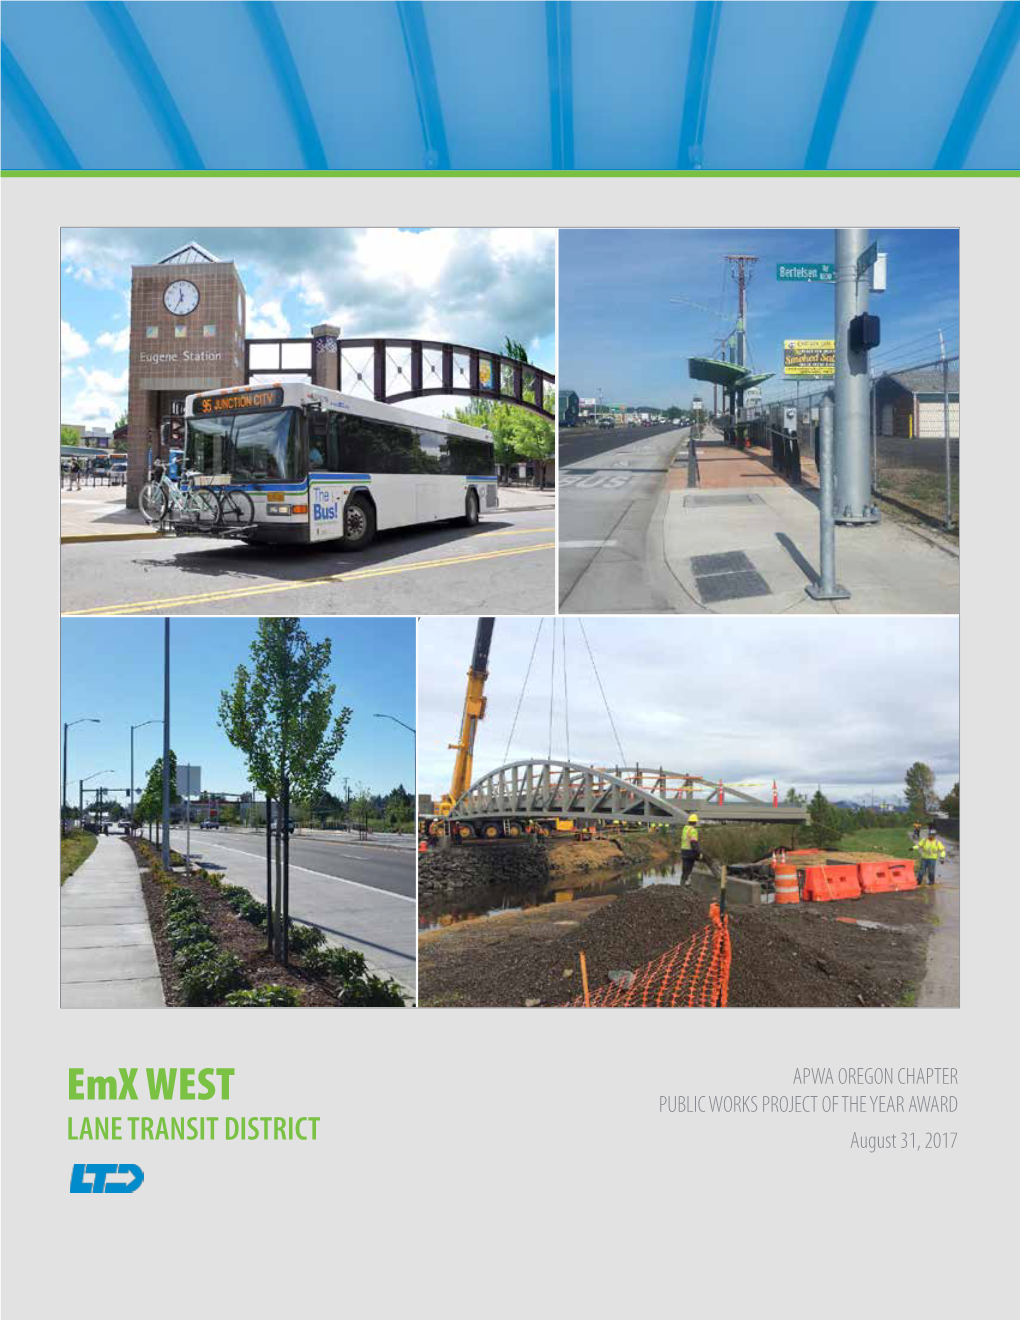 Emx WEST PUBLIC WORKS PROJECT of the YEAR AWARD LANE TRANSIT DISTRICT August 31, 2017 PUBLIC WORKS PROJECT of the YEAR NOMINATION FORM